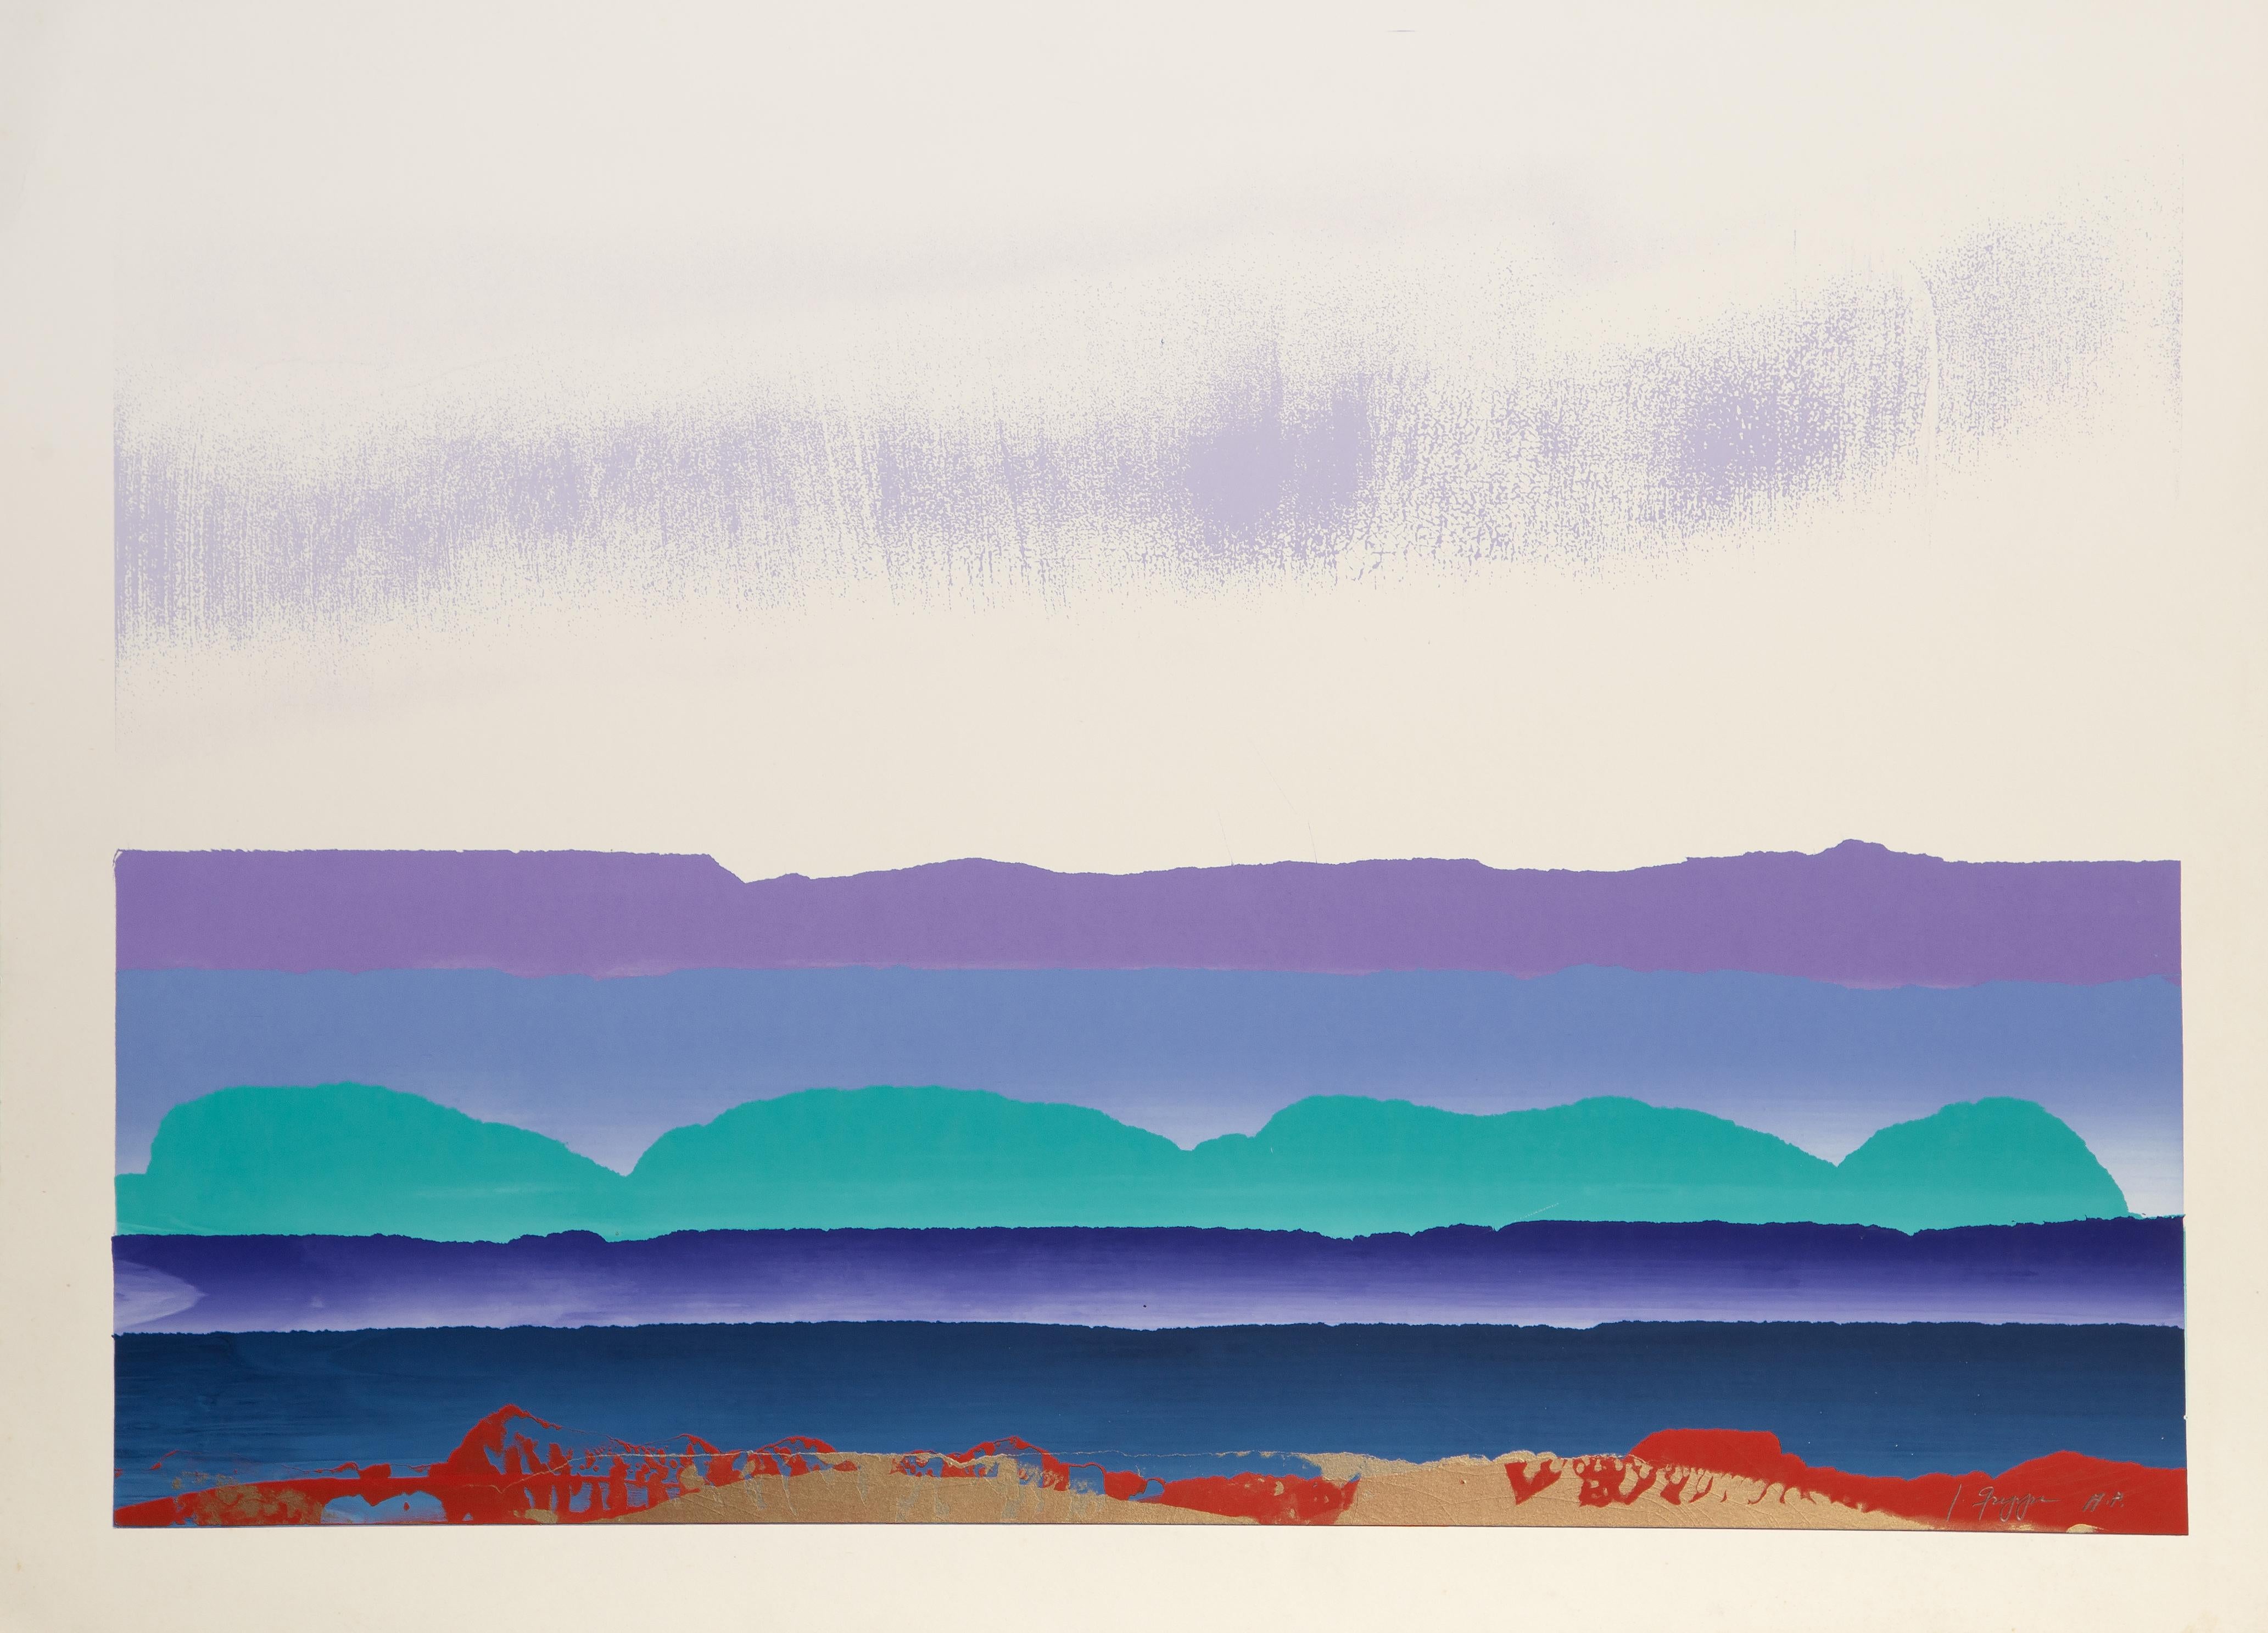 Landscape in Purple, Green, Blue and Red
Joseph Grippi, American (1924–2001)
Date: circa 1975
Screenprint, signed and numbered in pencil
Edition of AP
Image Size: 20.5 x 30 inches
Size: 24 x 33 in. (60.96 x 83.82 cm)